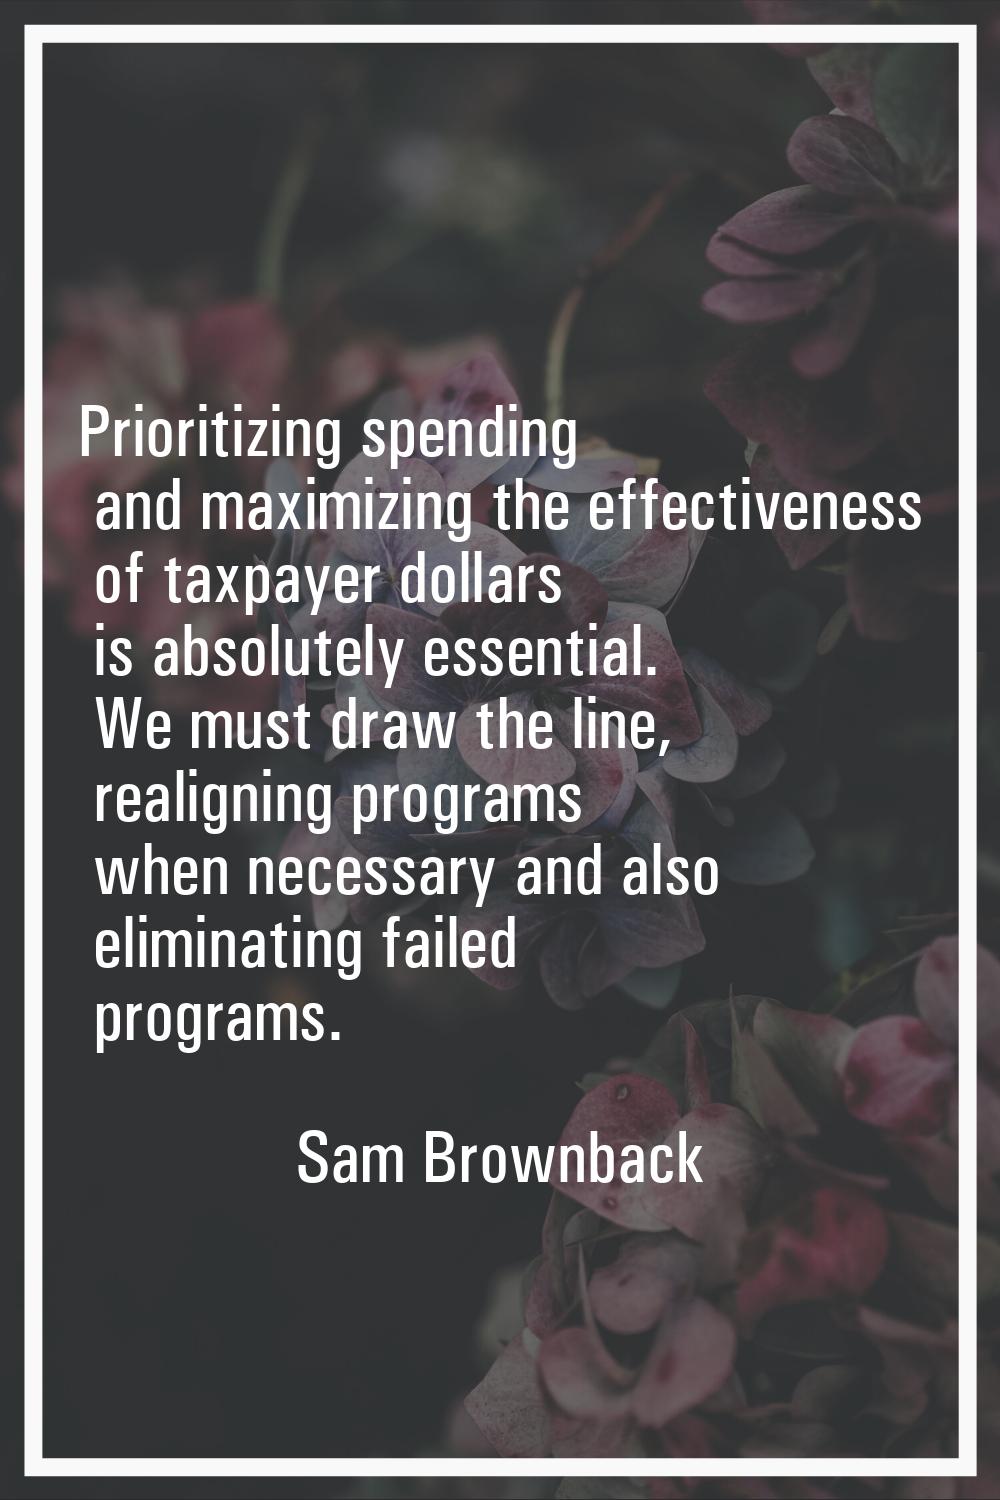 Prioritizing spending and maximizing the effectiveness of taxpayer dollars is absolutely essential.